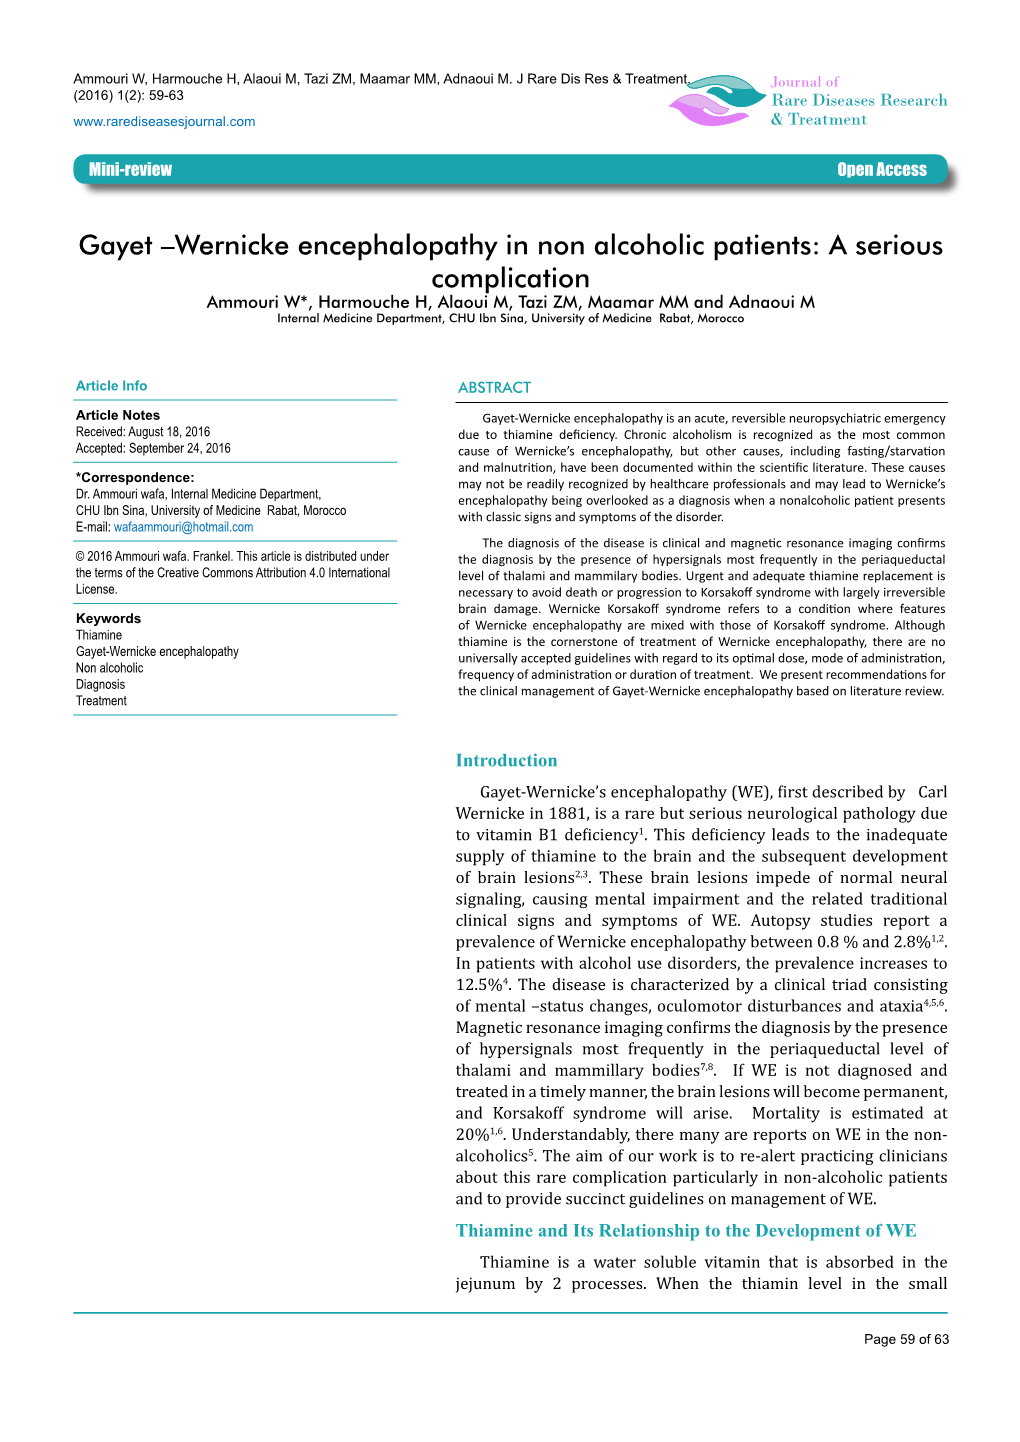 Gayet –Wernicke Encephalopathy in Non Alcoholic Patients